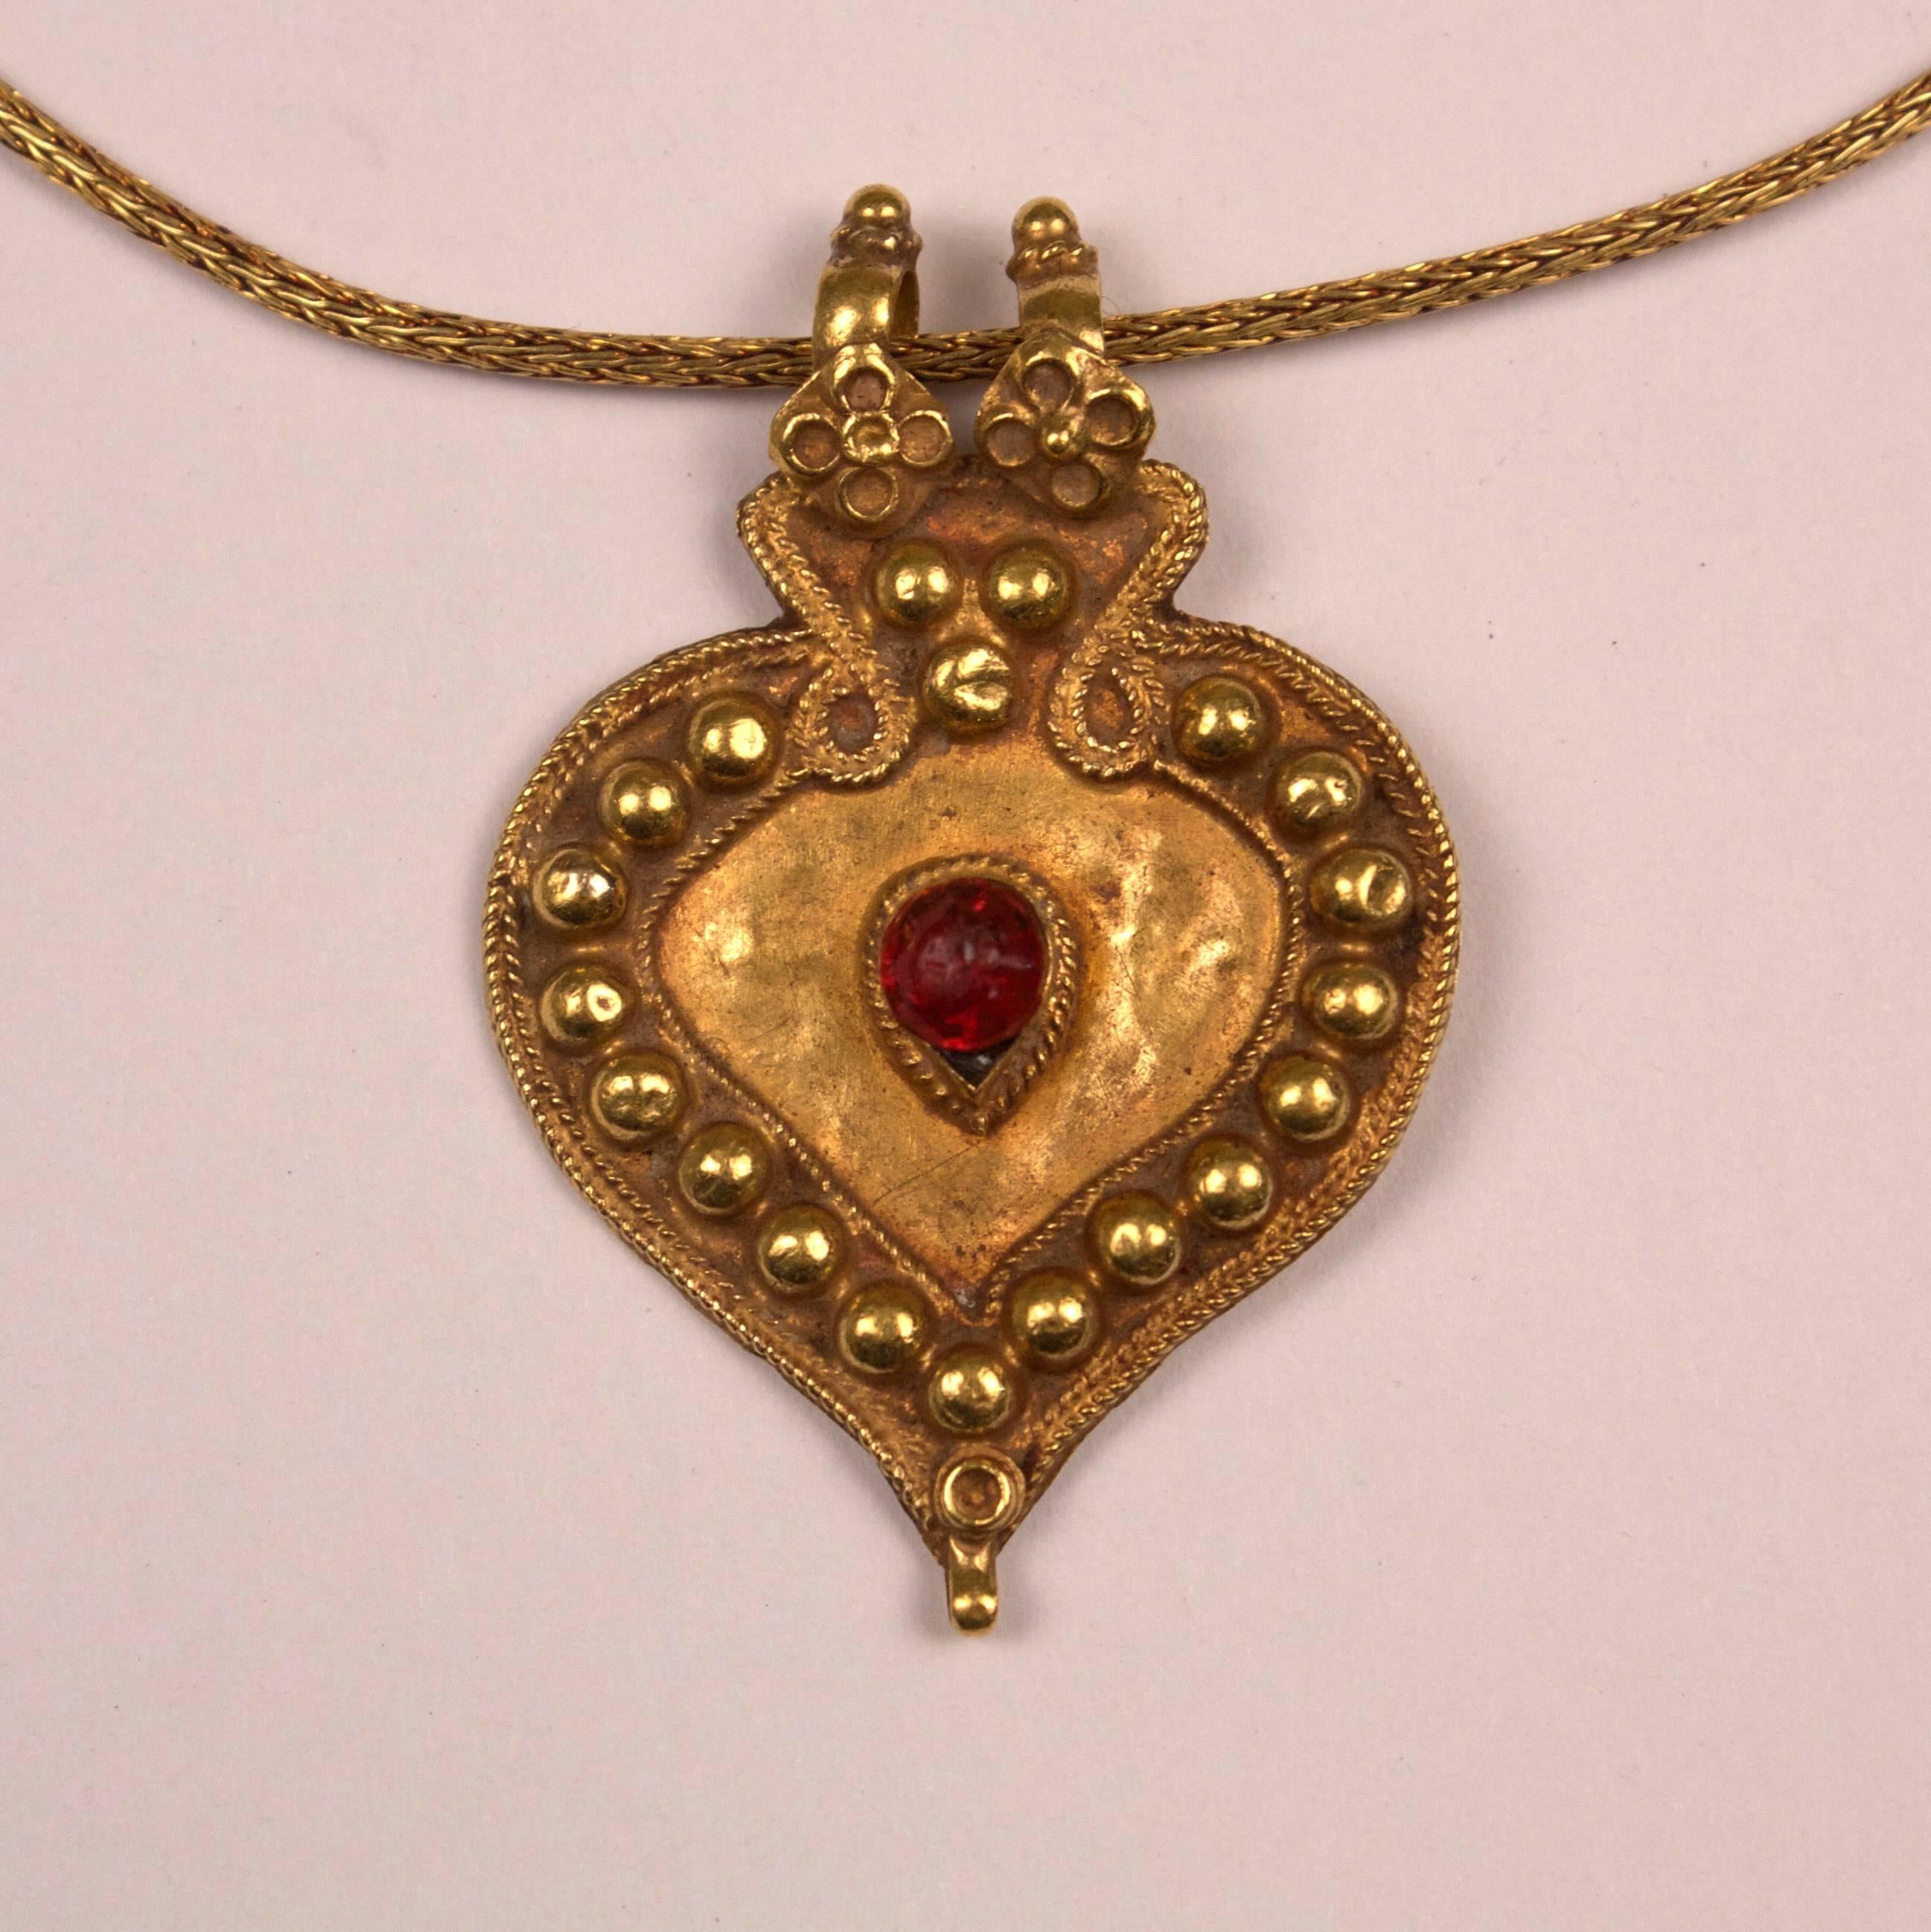 Traditional 22-karat gold pendant with rich tone, raised gold bead work and a ruby red glass centerpiece. This 1920s Rajasthani pendant hangs from a contemporary 18-karat gold chain with unscrewable end. See image number 4. Pendant measures: